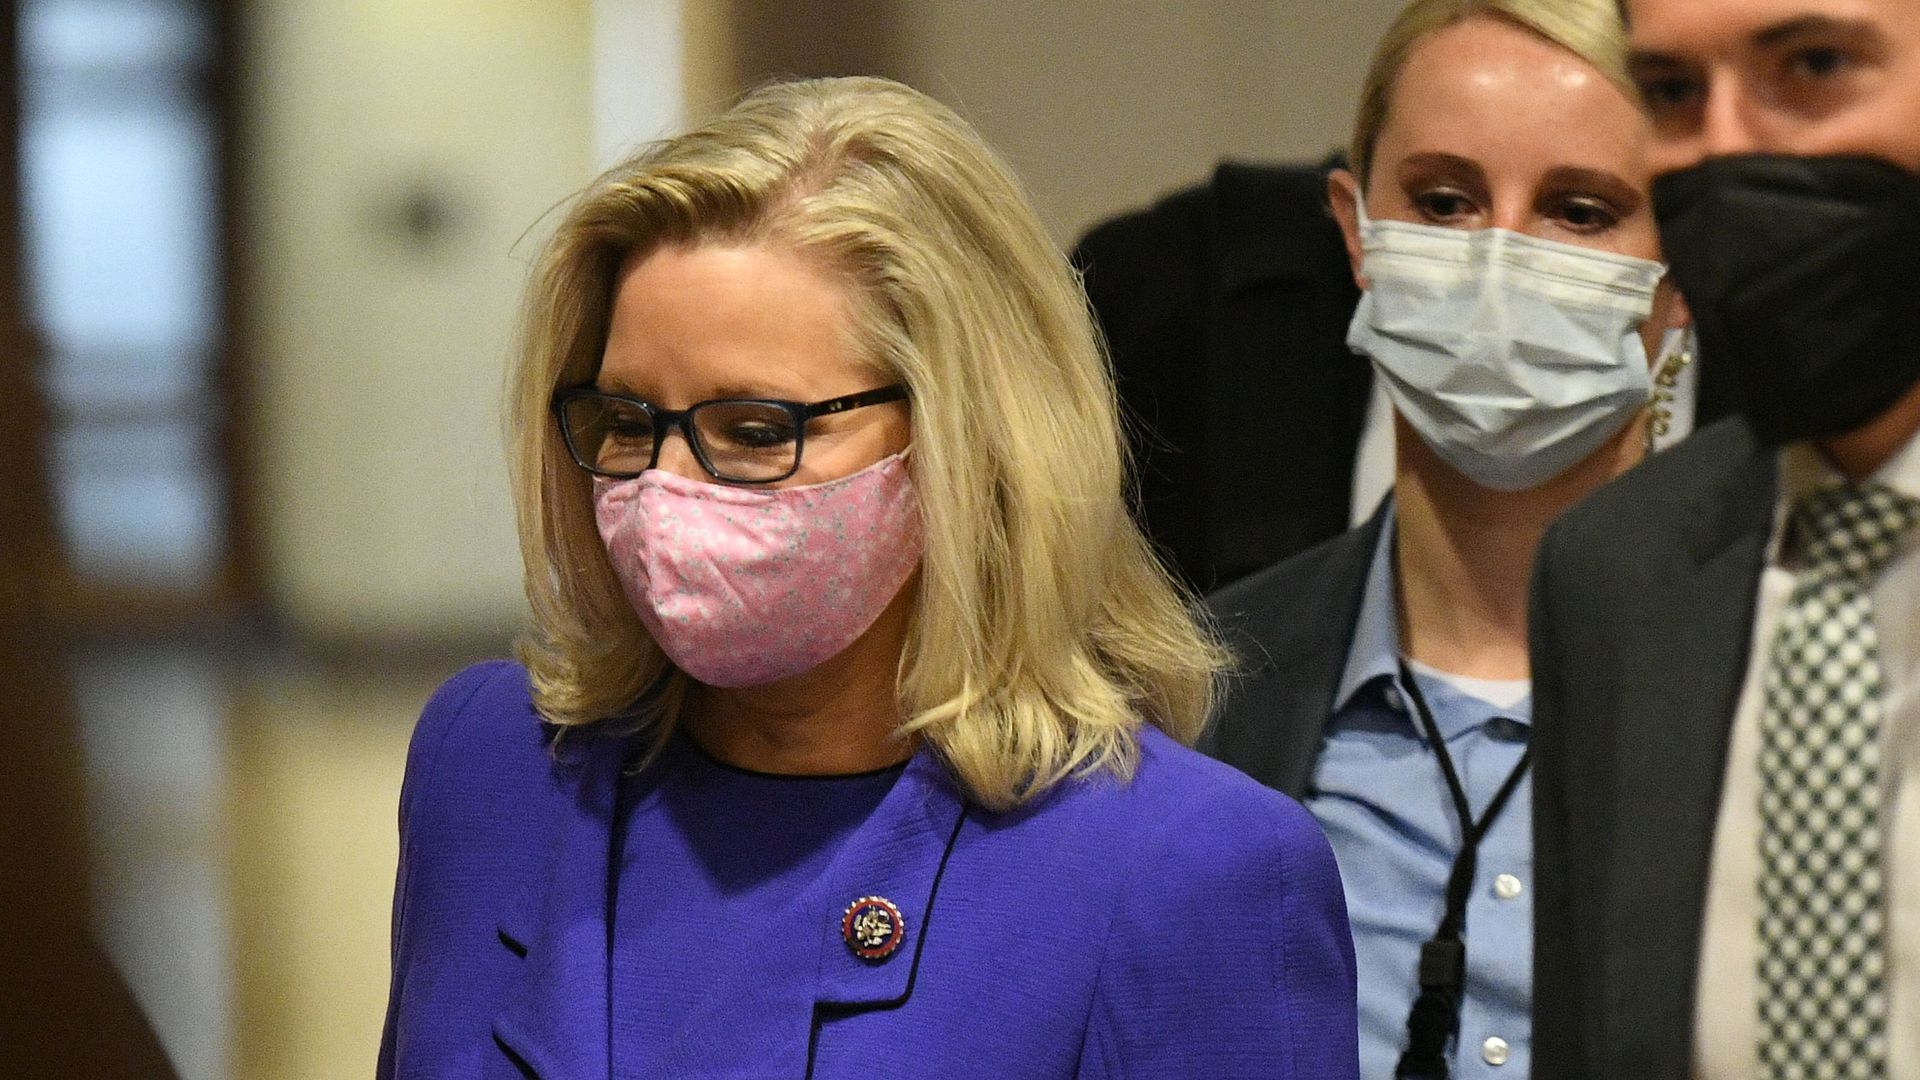 Rep. Liz Cheney (R-Wyo.) arriving on Capitol Hill on May 12.